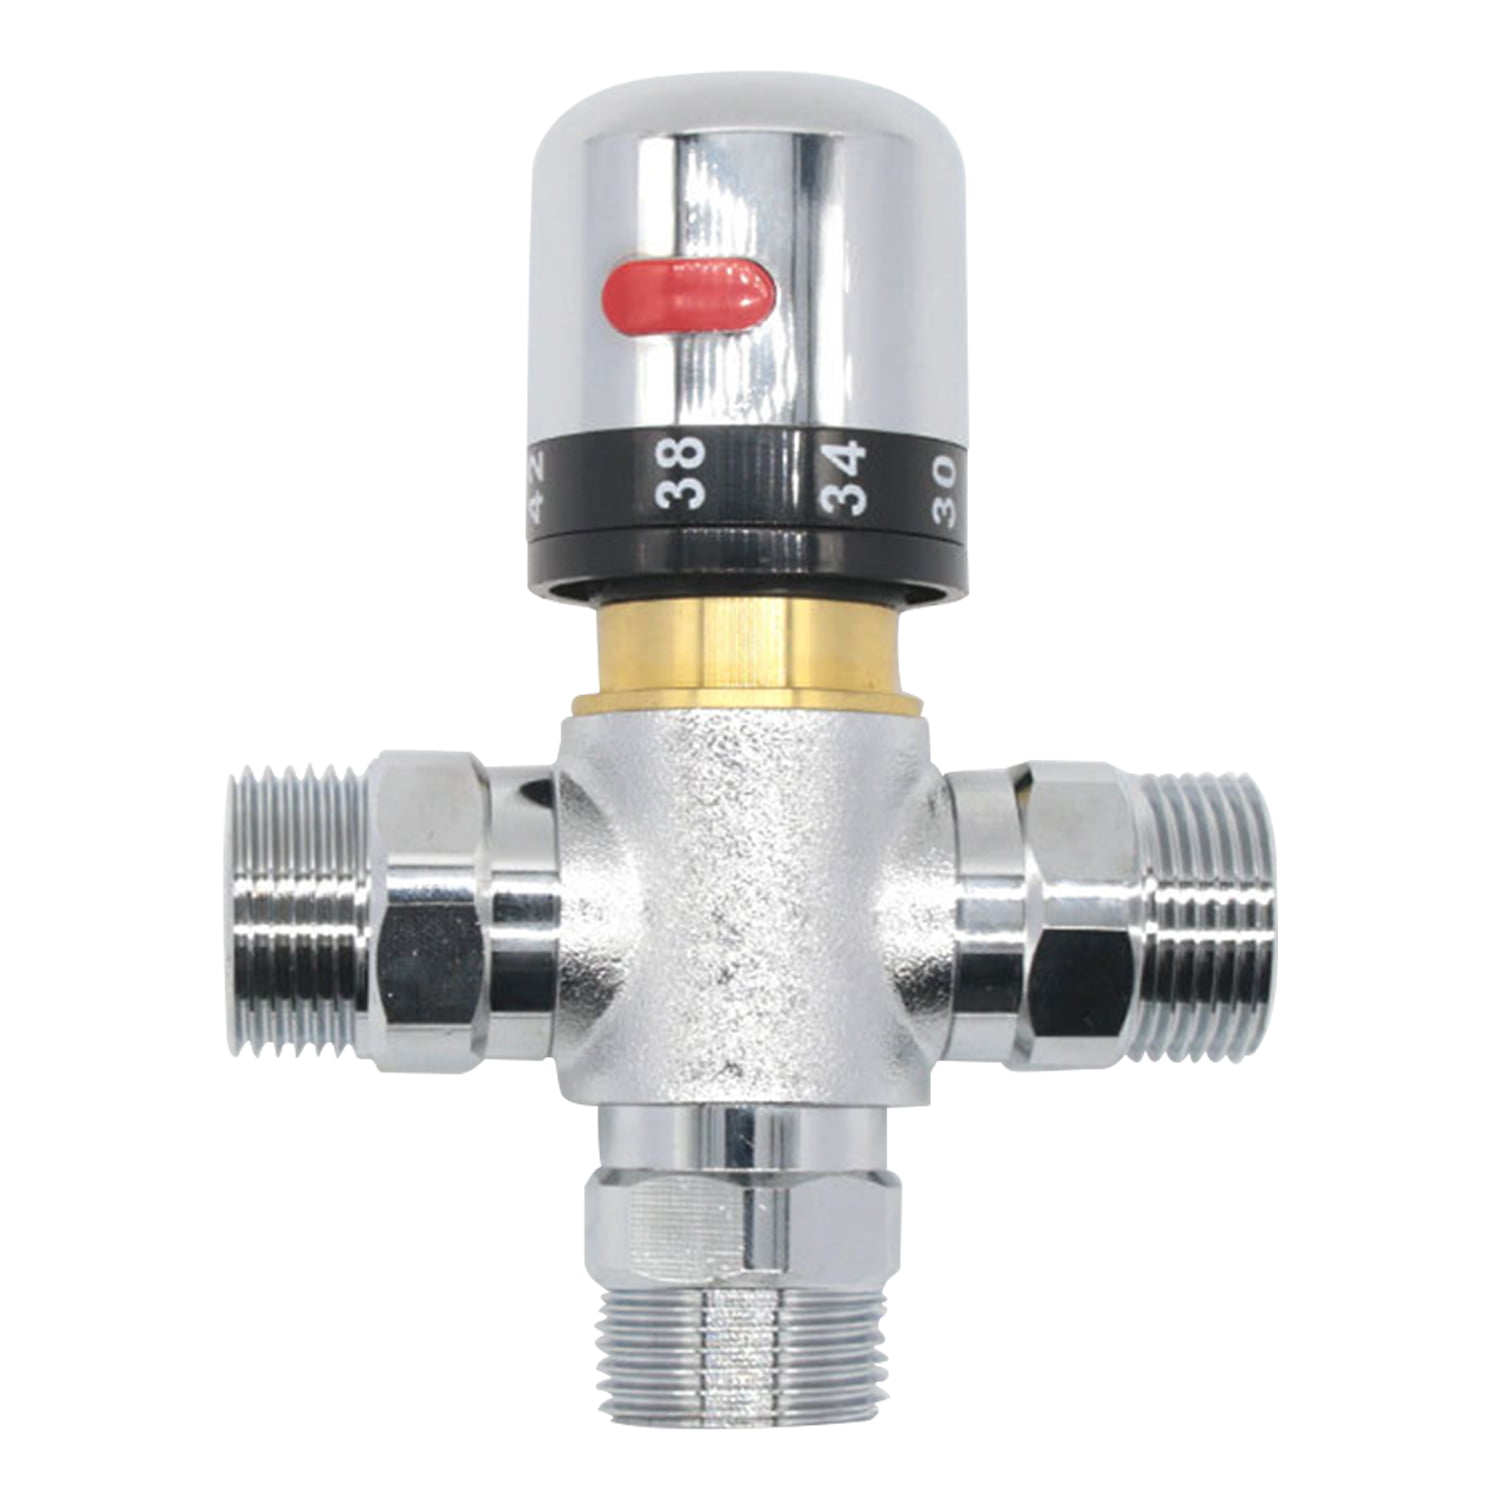 Brass Male 3 Way Thermostatic Mixing Valve Shower Water Temperature Control L8Z9